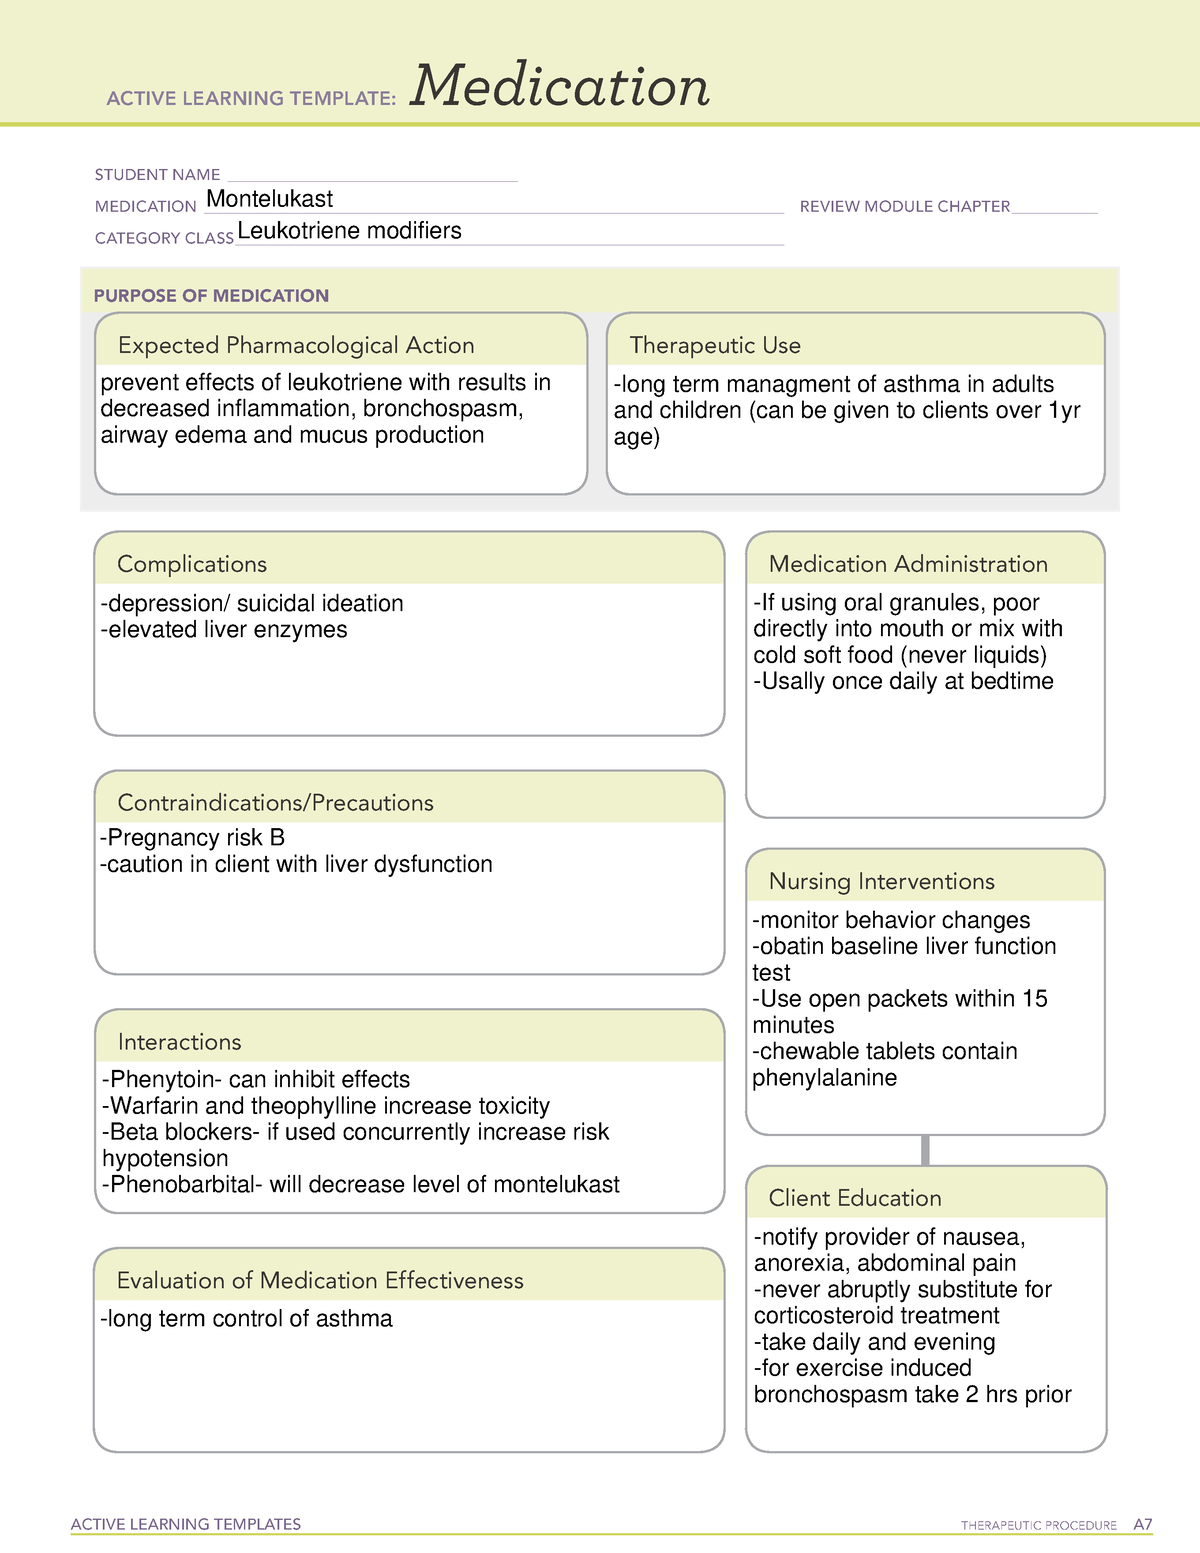 Medication Montelukast ACTIVE LEARNING TEMPLATES THERAPEUTIC 